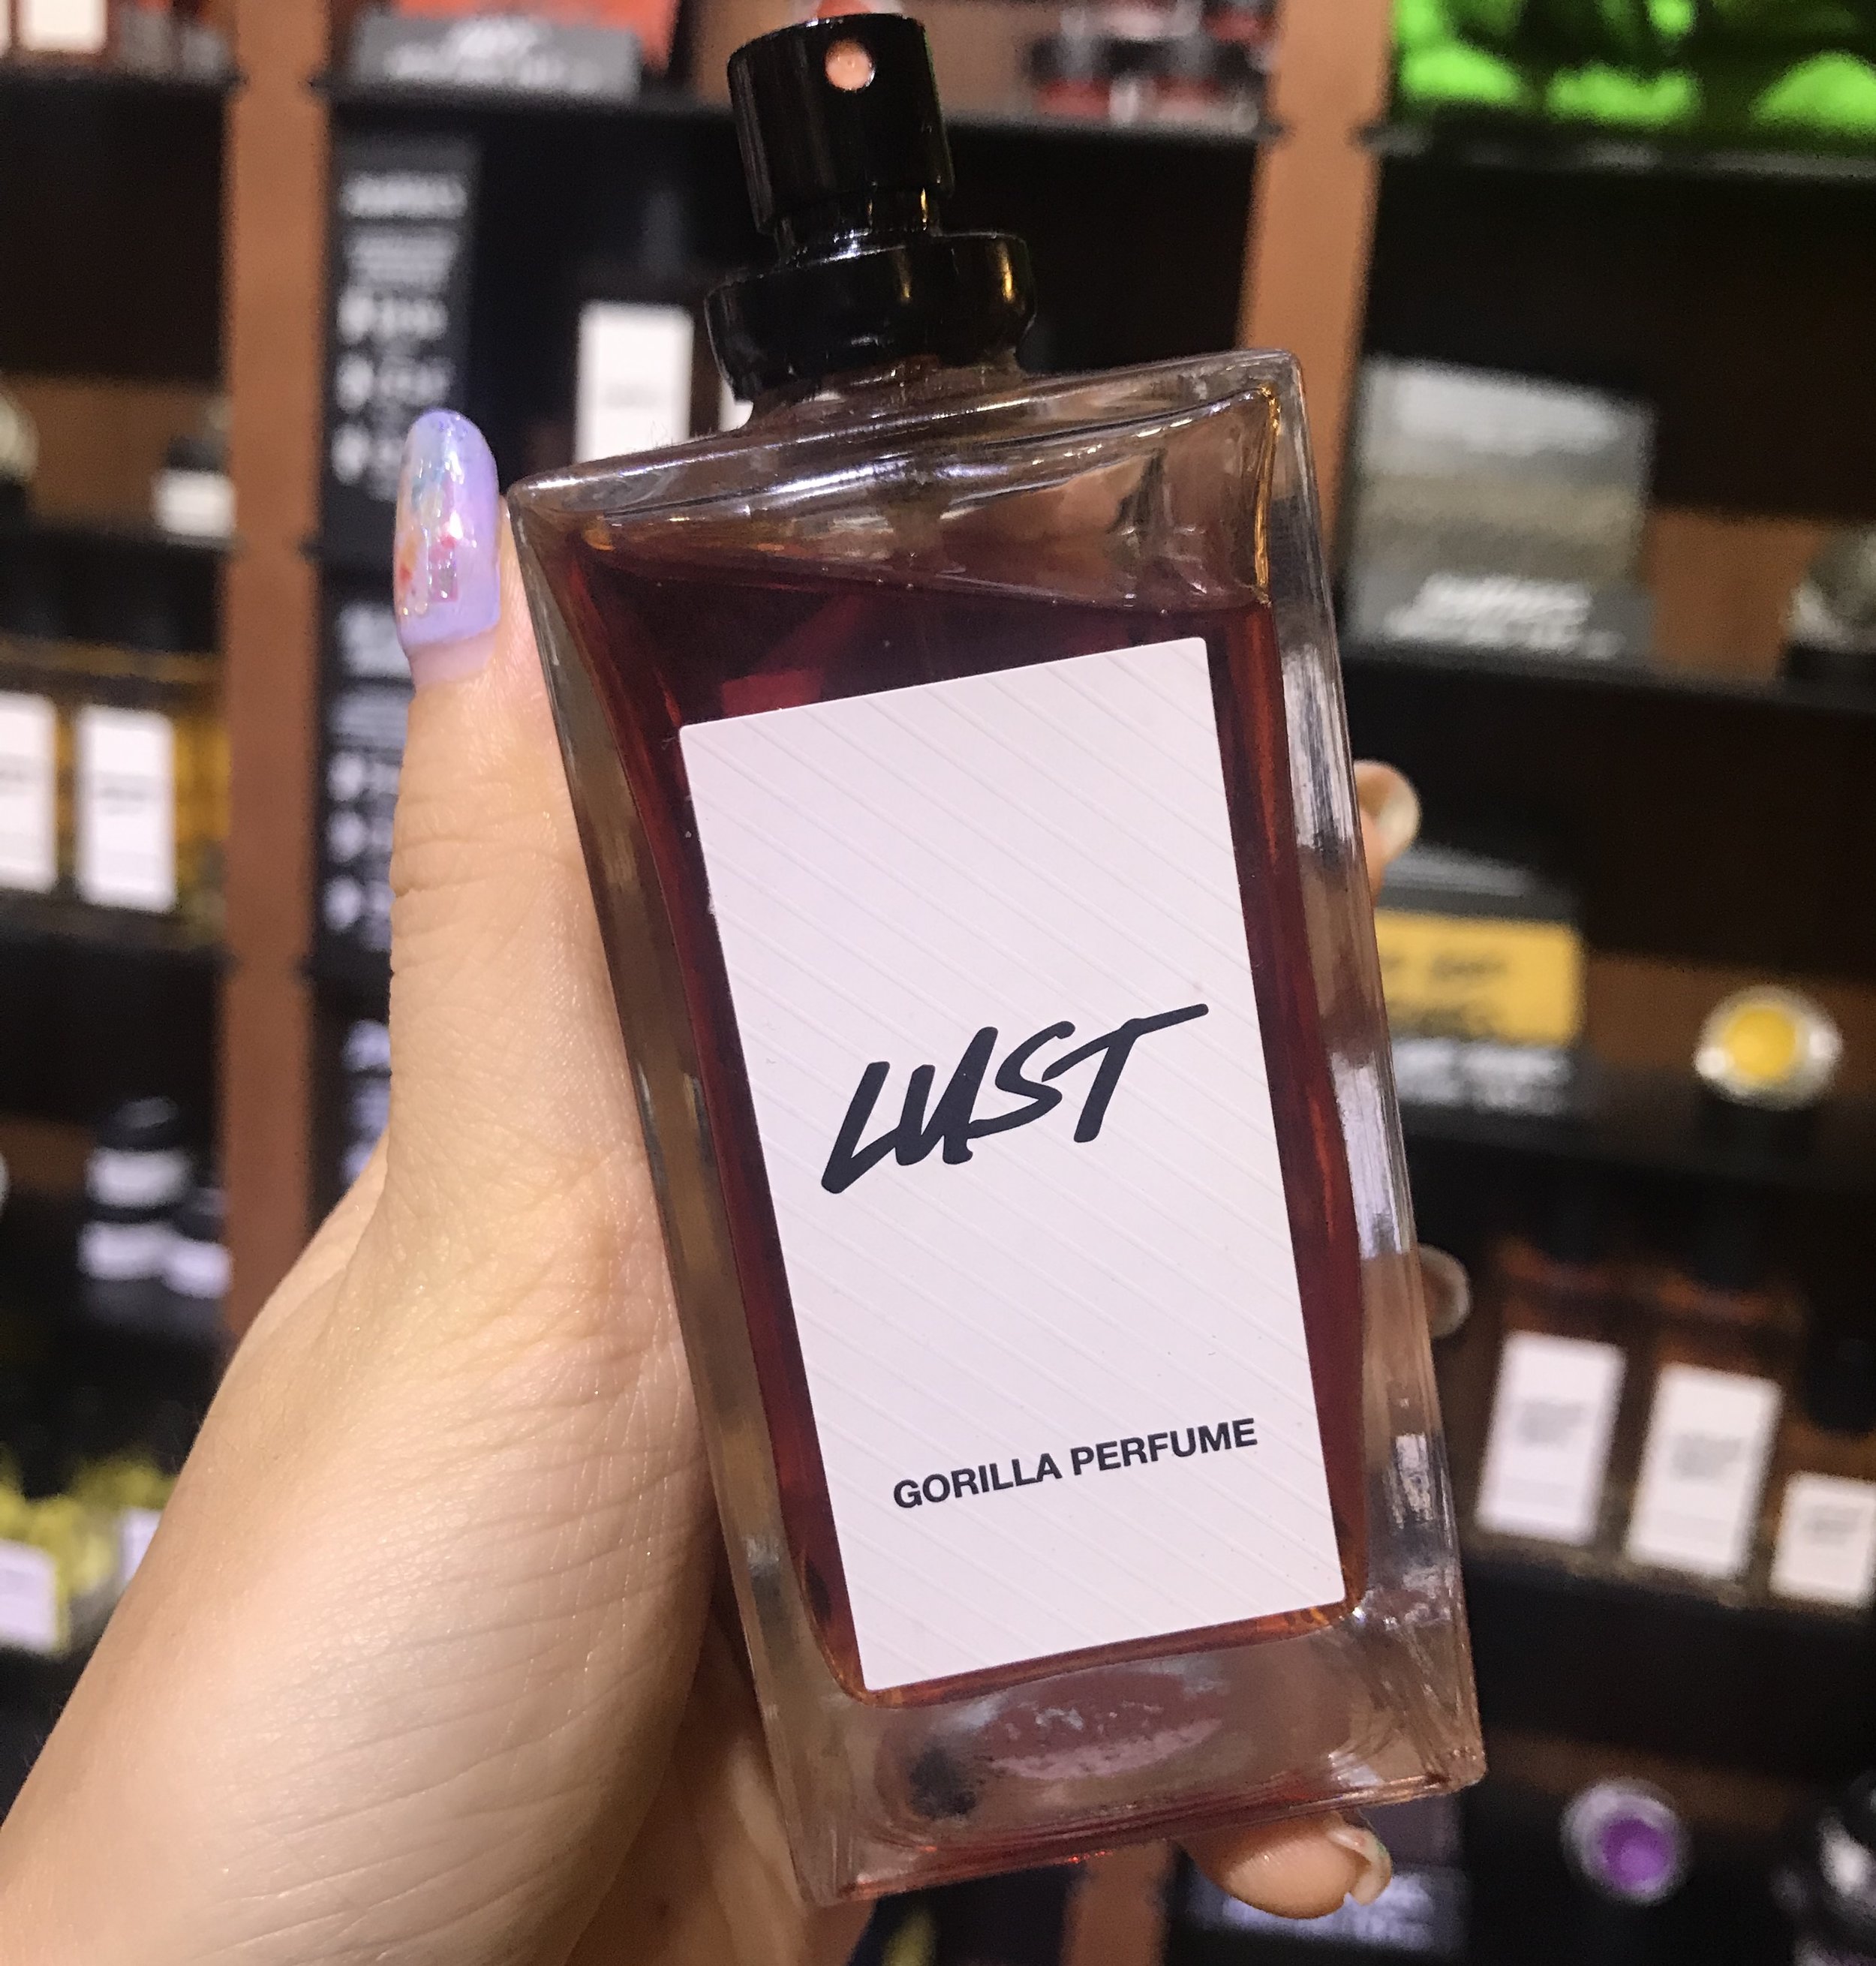 Jasmine Lover? Here's the Lush Gorilla Perfume That Will Have You 